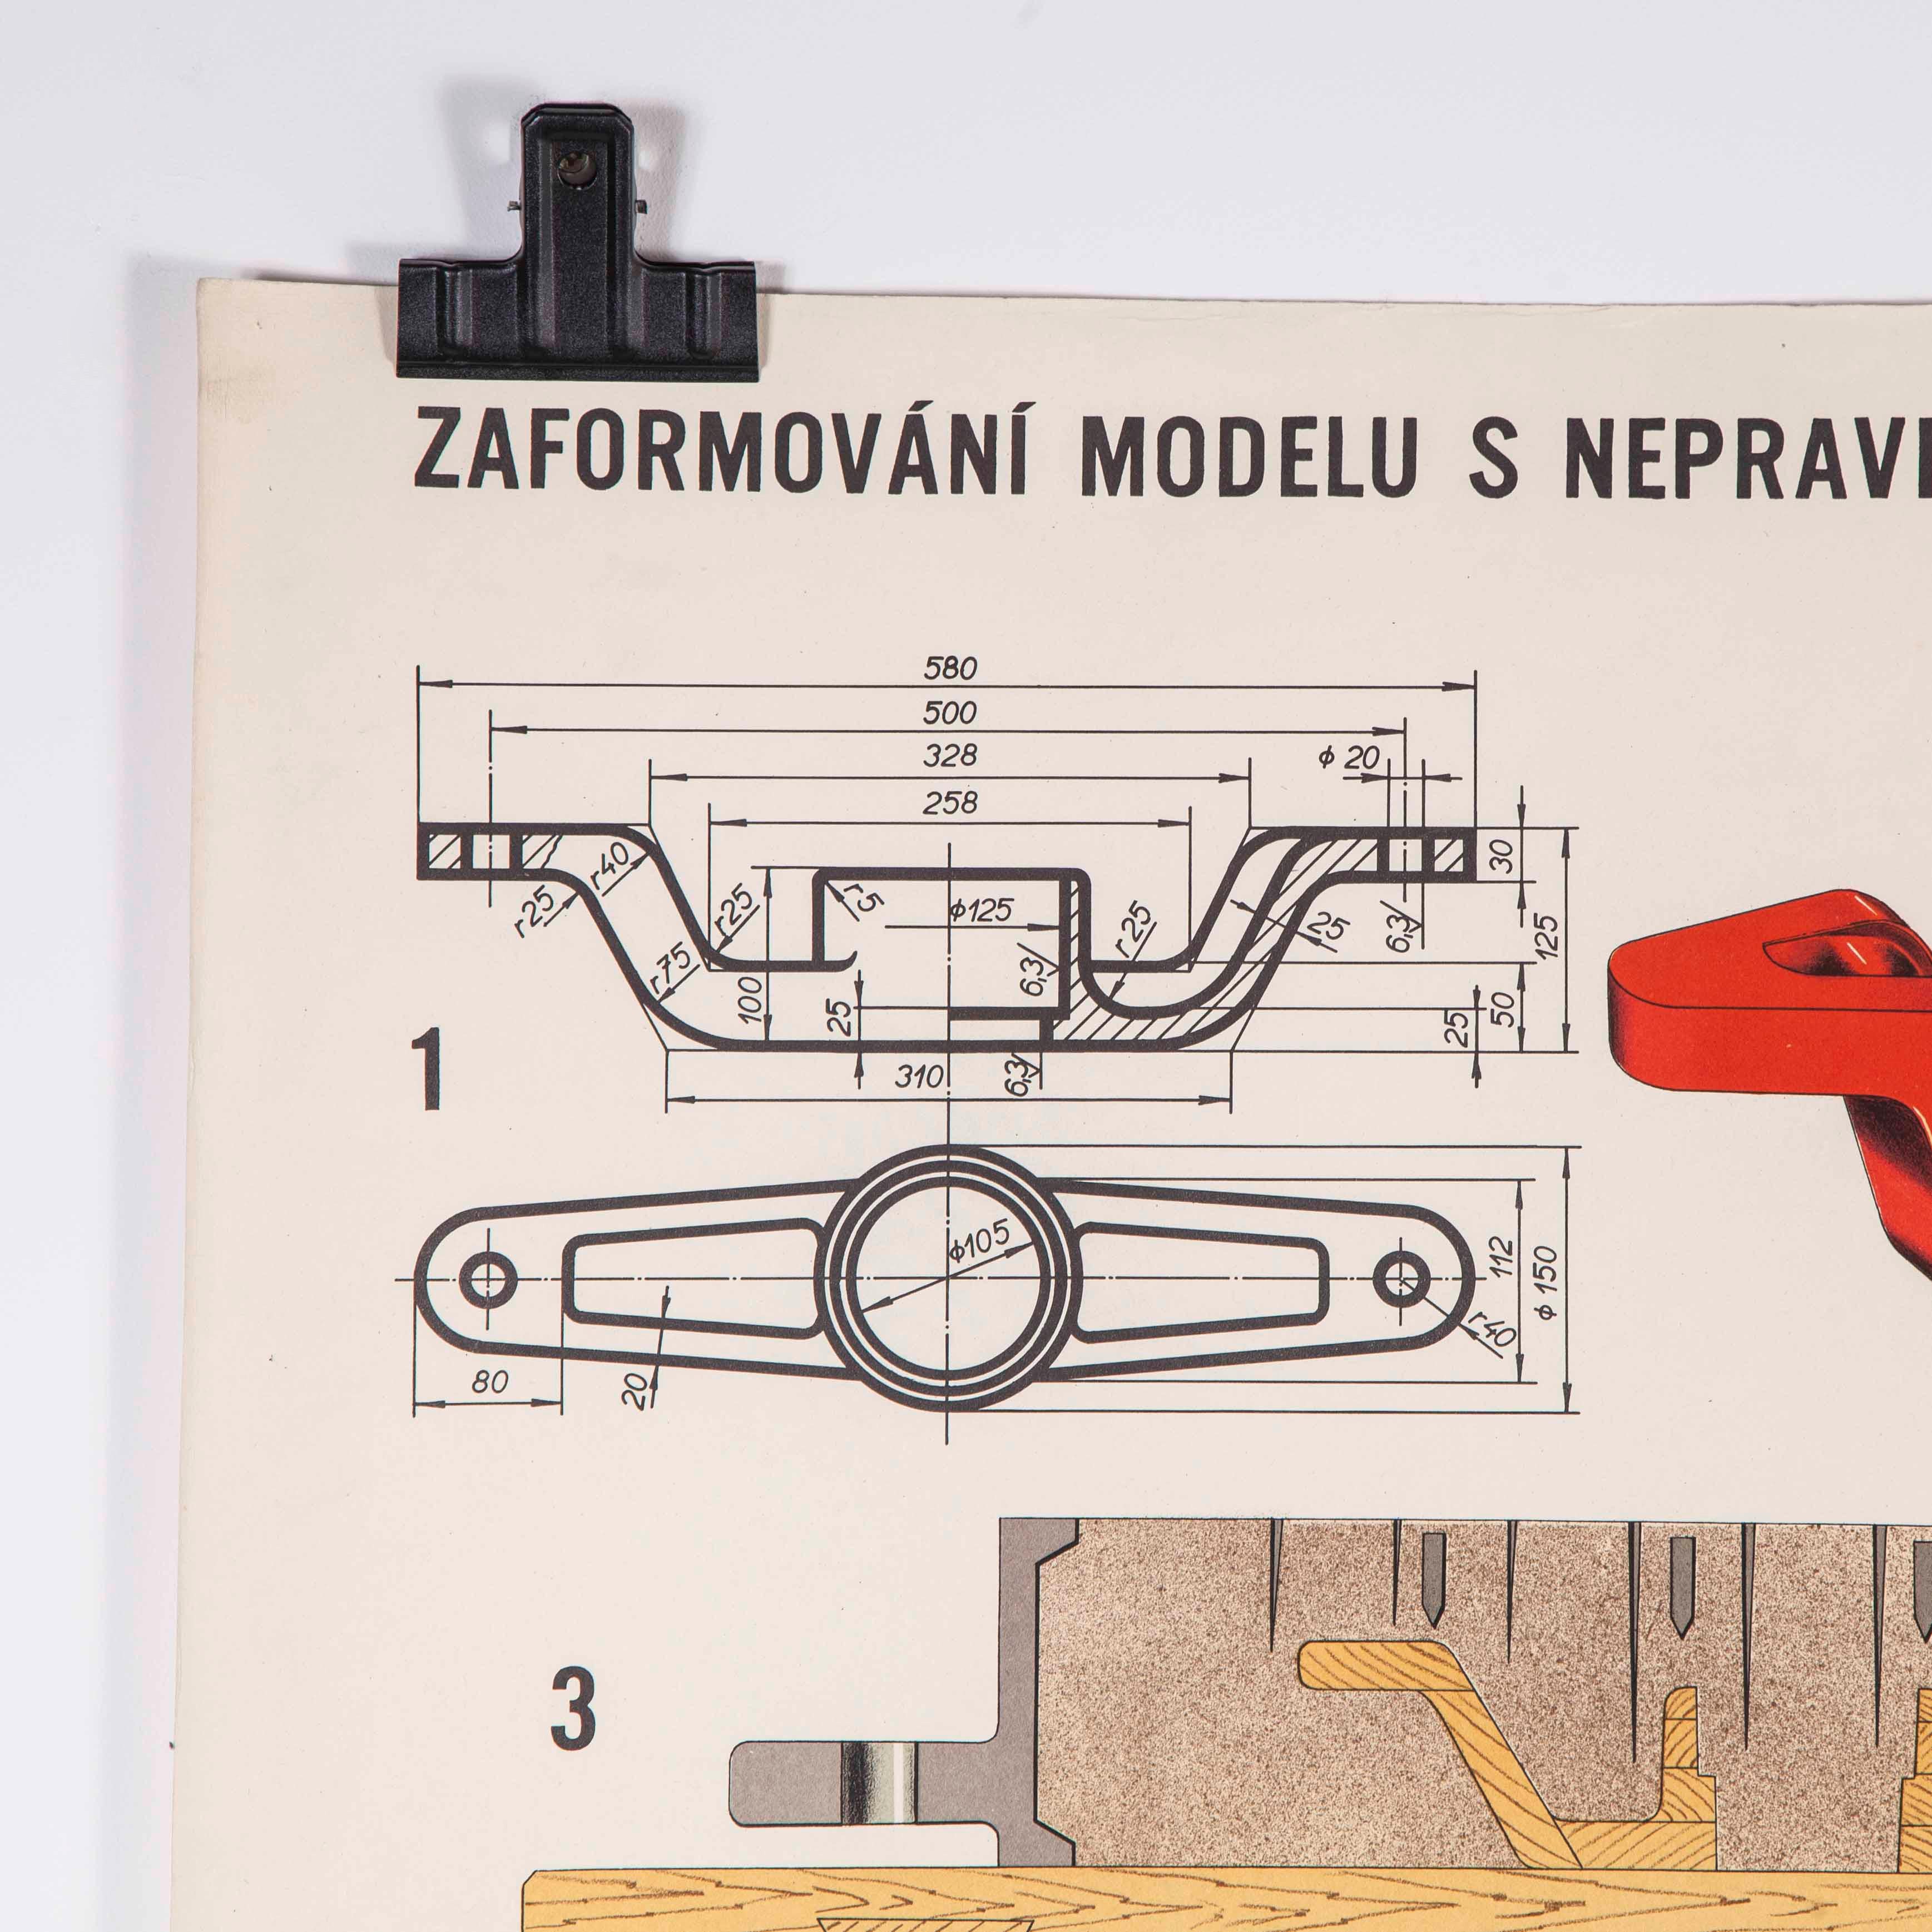 Paper Czech Technical Industrial Drawing, Foundry Mould Engineering Poster, 25 For Sale